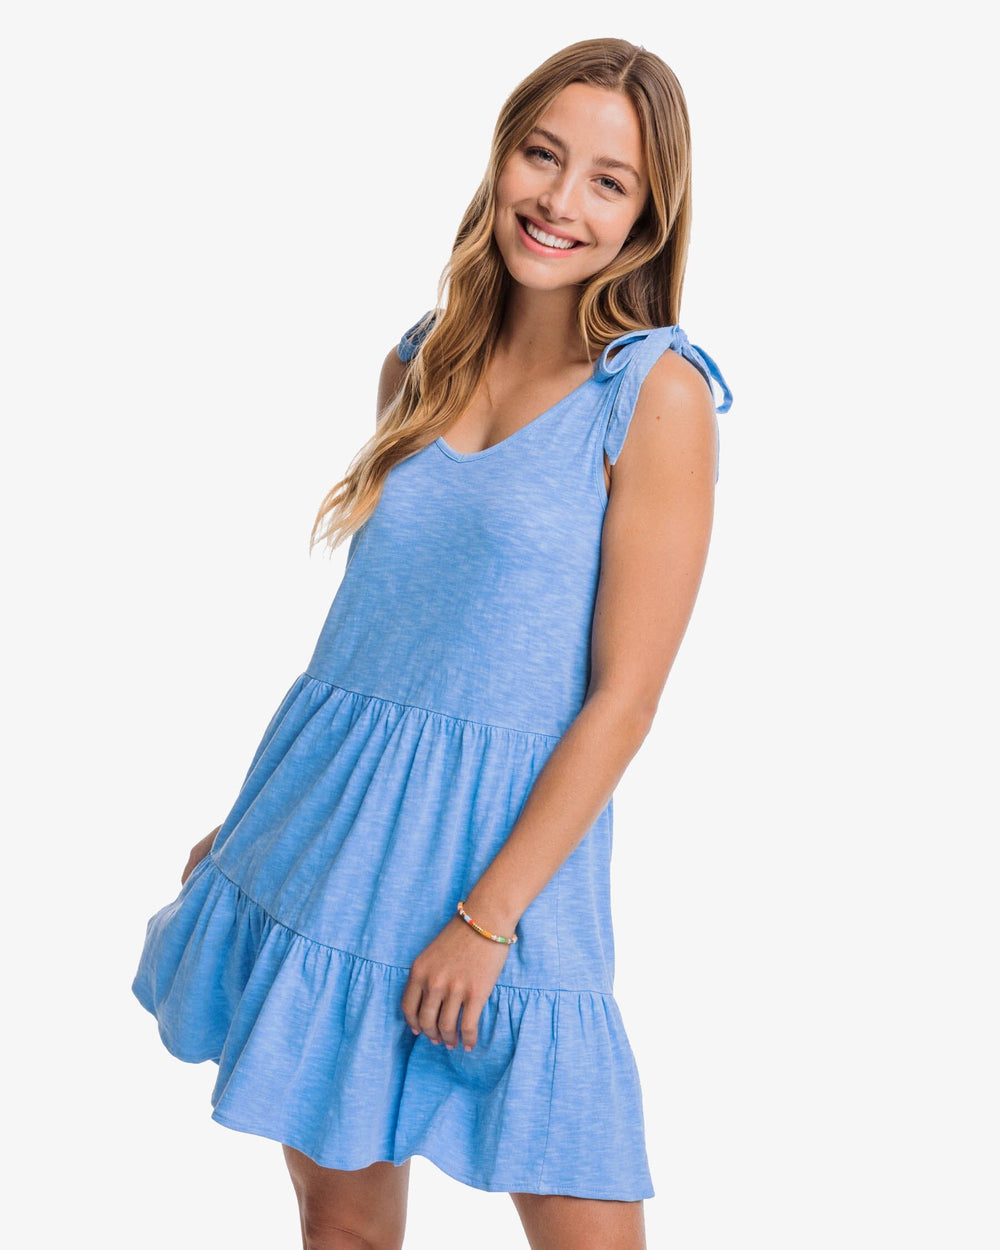 The angle front view of the Southern Tide Nicole Sun Farer Tiered Tank Dress by Southern Tide - Boat Blue